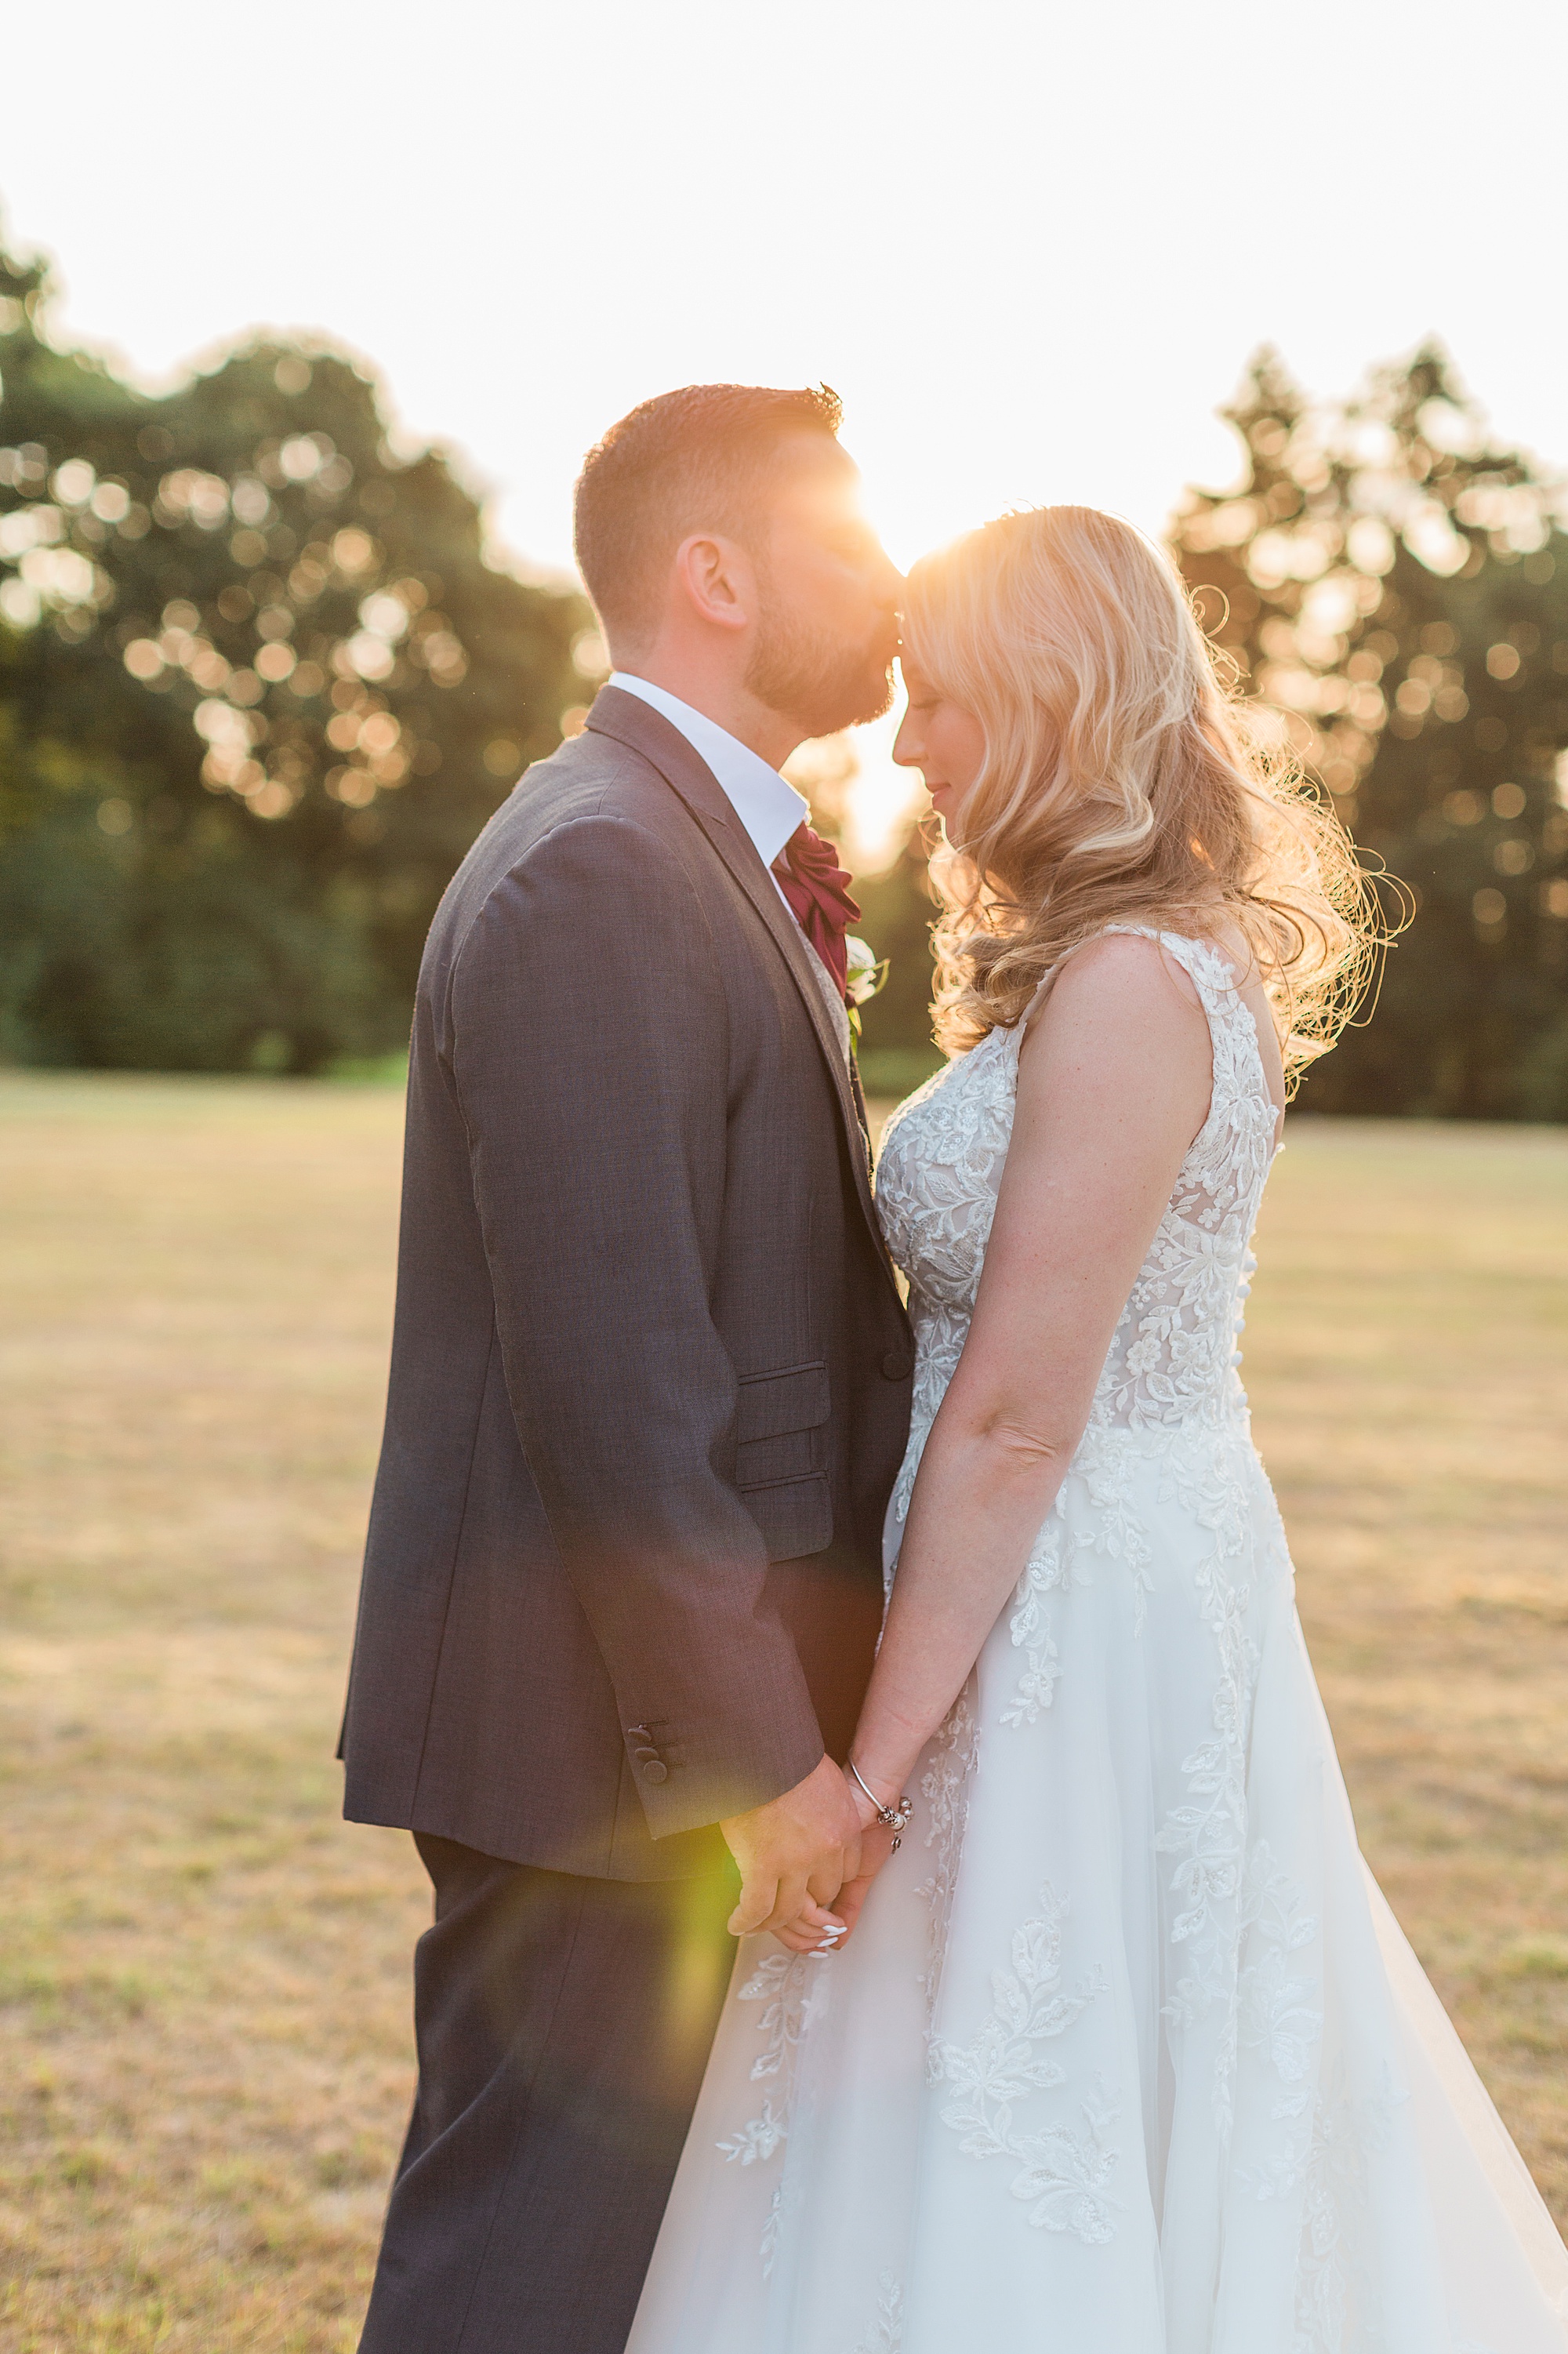 photo of a bride and groom stood facing towards each other and their bodies connected, holding hands with the setting sun behind them. the groom is kissing his wife on the forehead